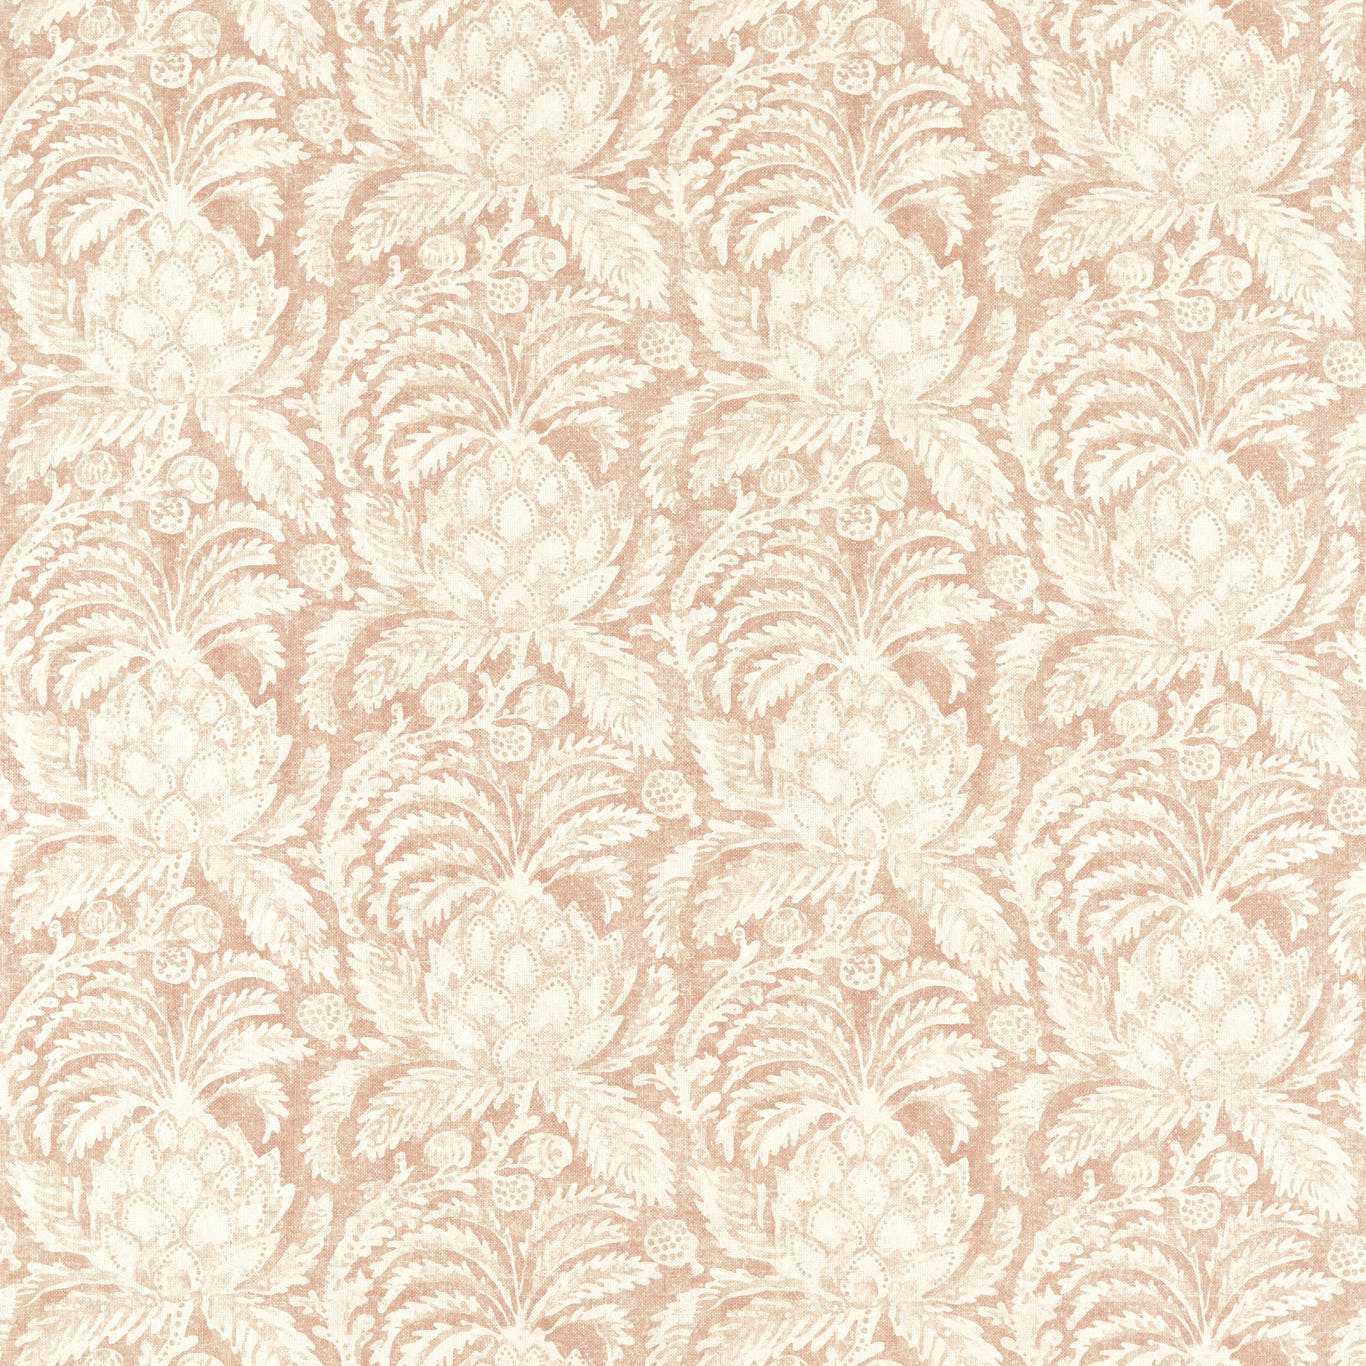 Pina de Indes Tuscan Pink Fabric by ZOF